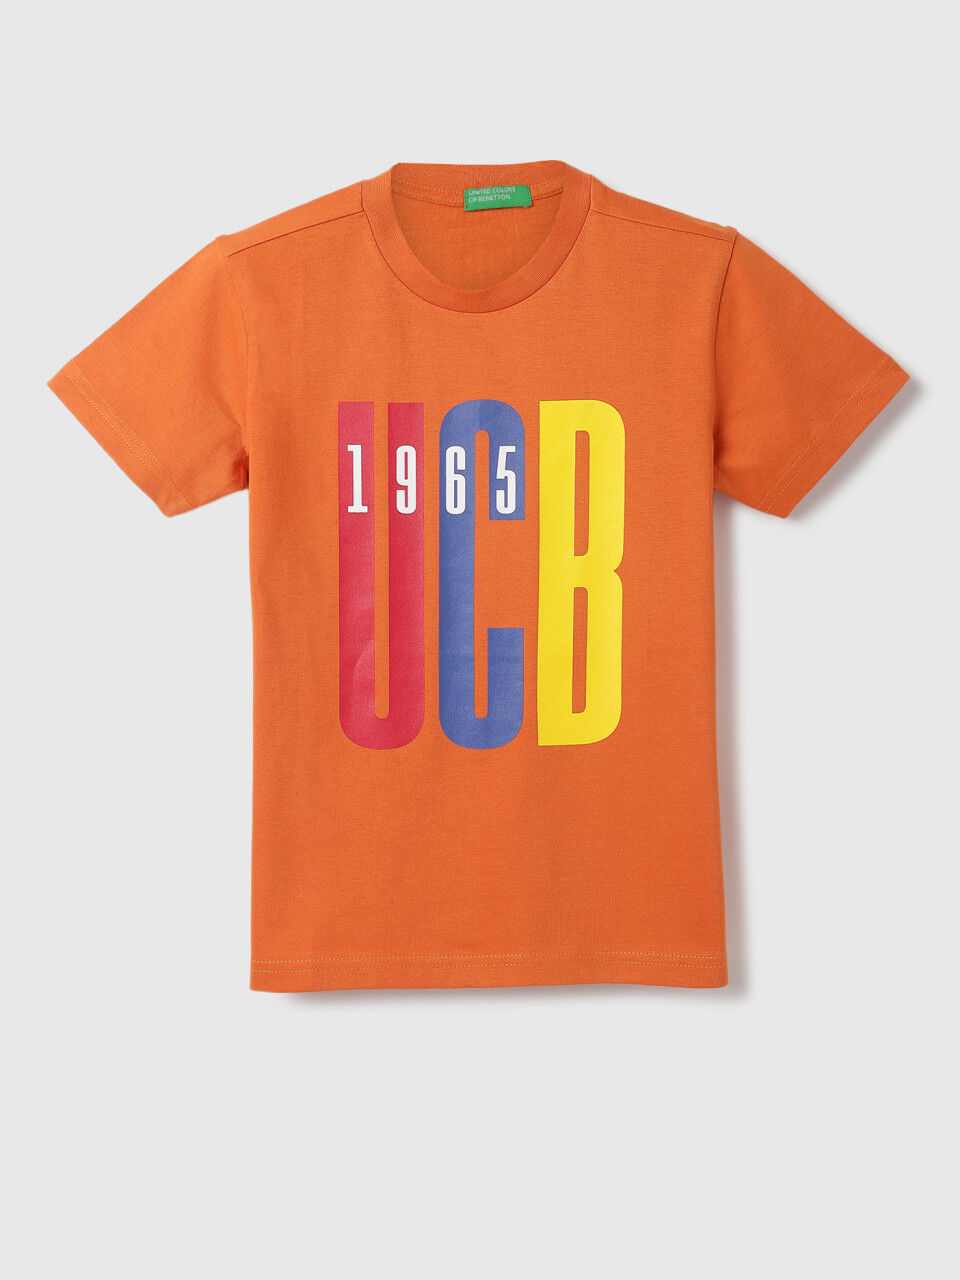 United Colors of Benetton Boys Printed Round Neck T-Shirt